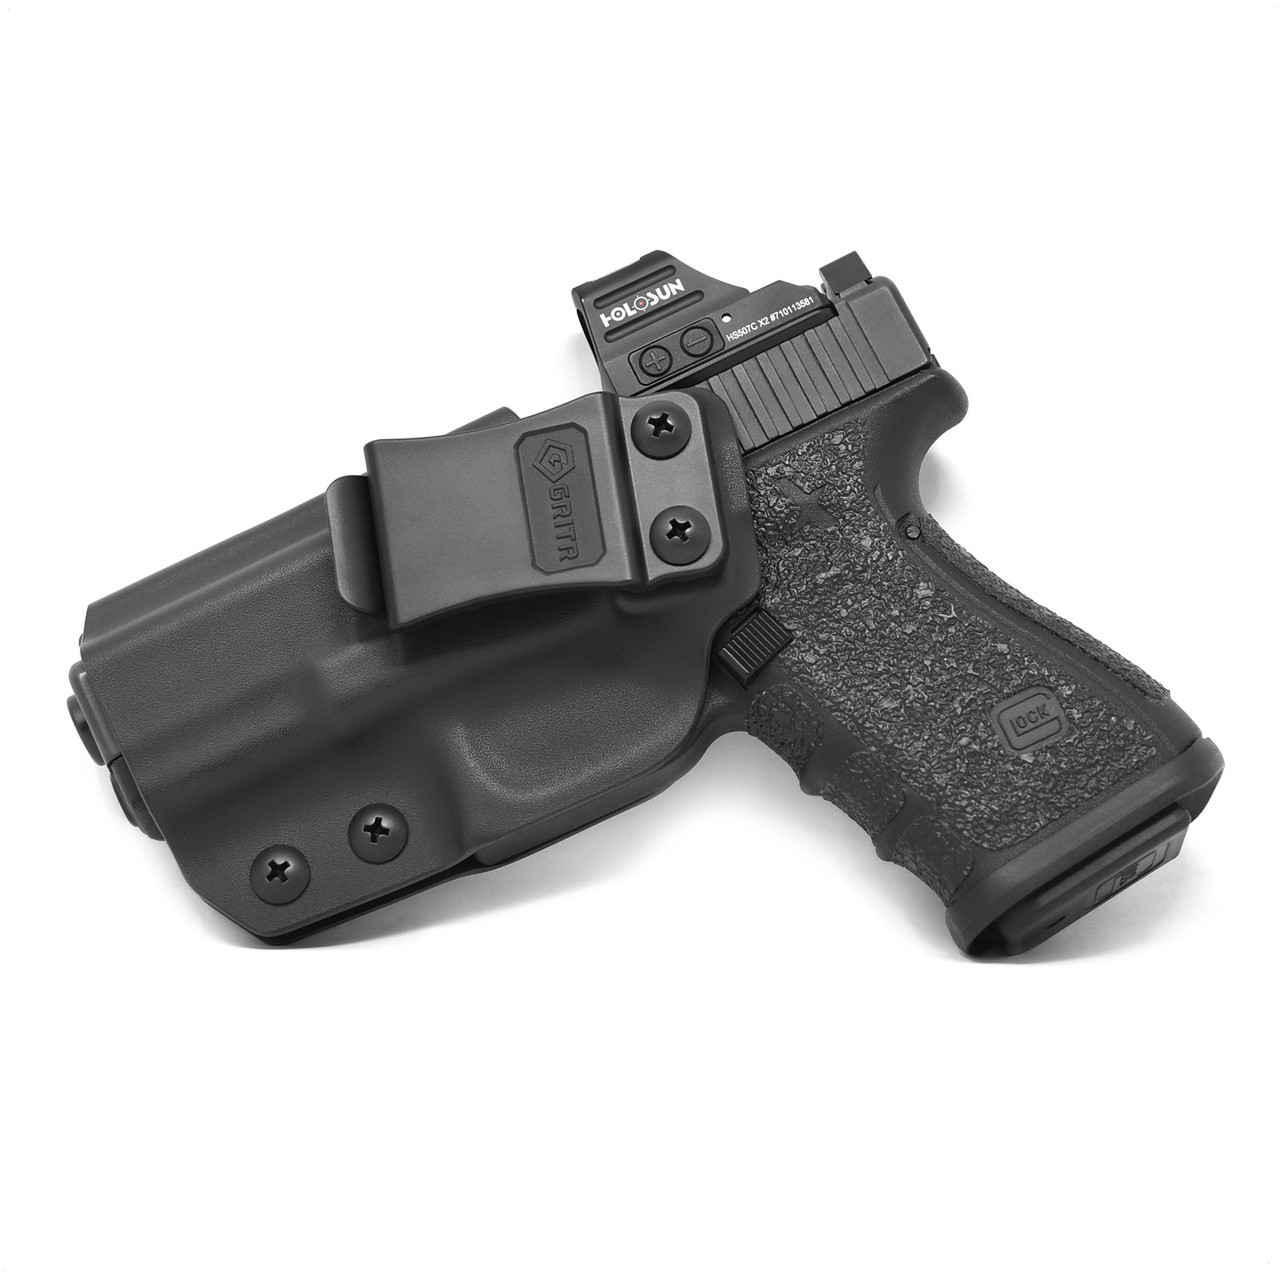 Tactical Concealed Carry Left/Right Hand IWB OWB Gun Holster